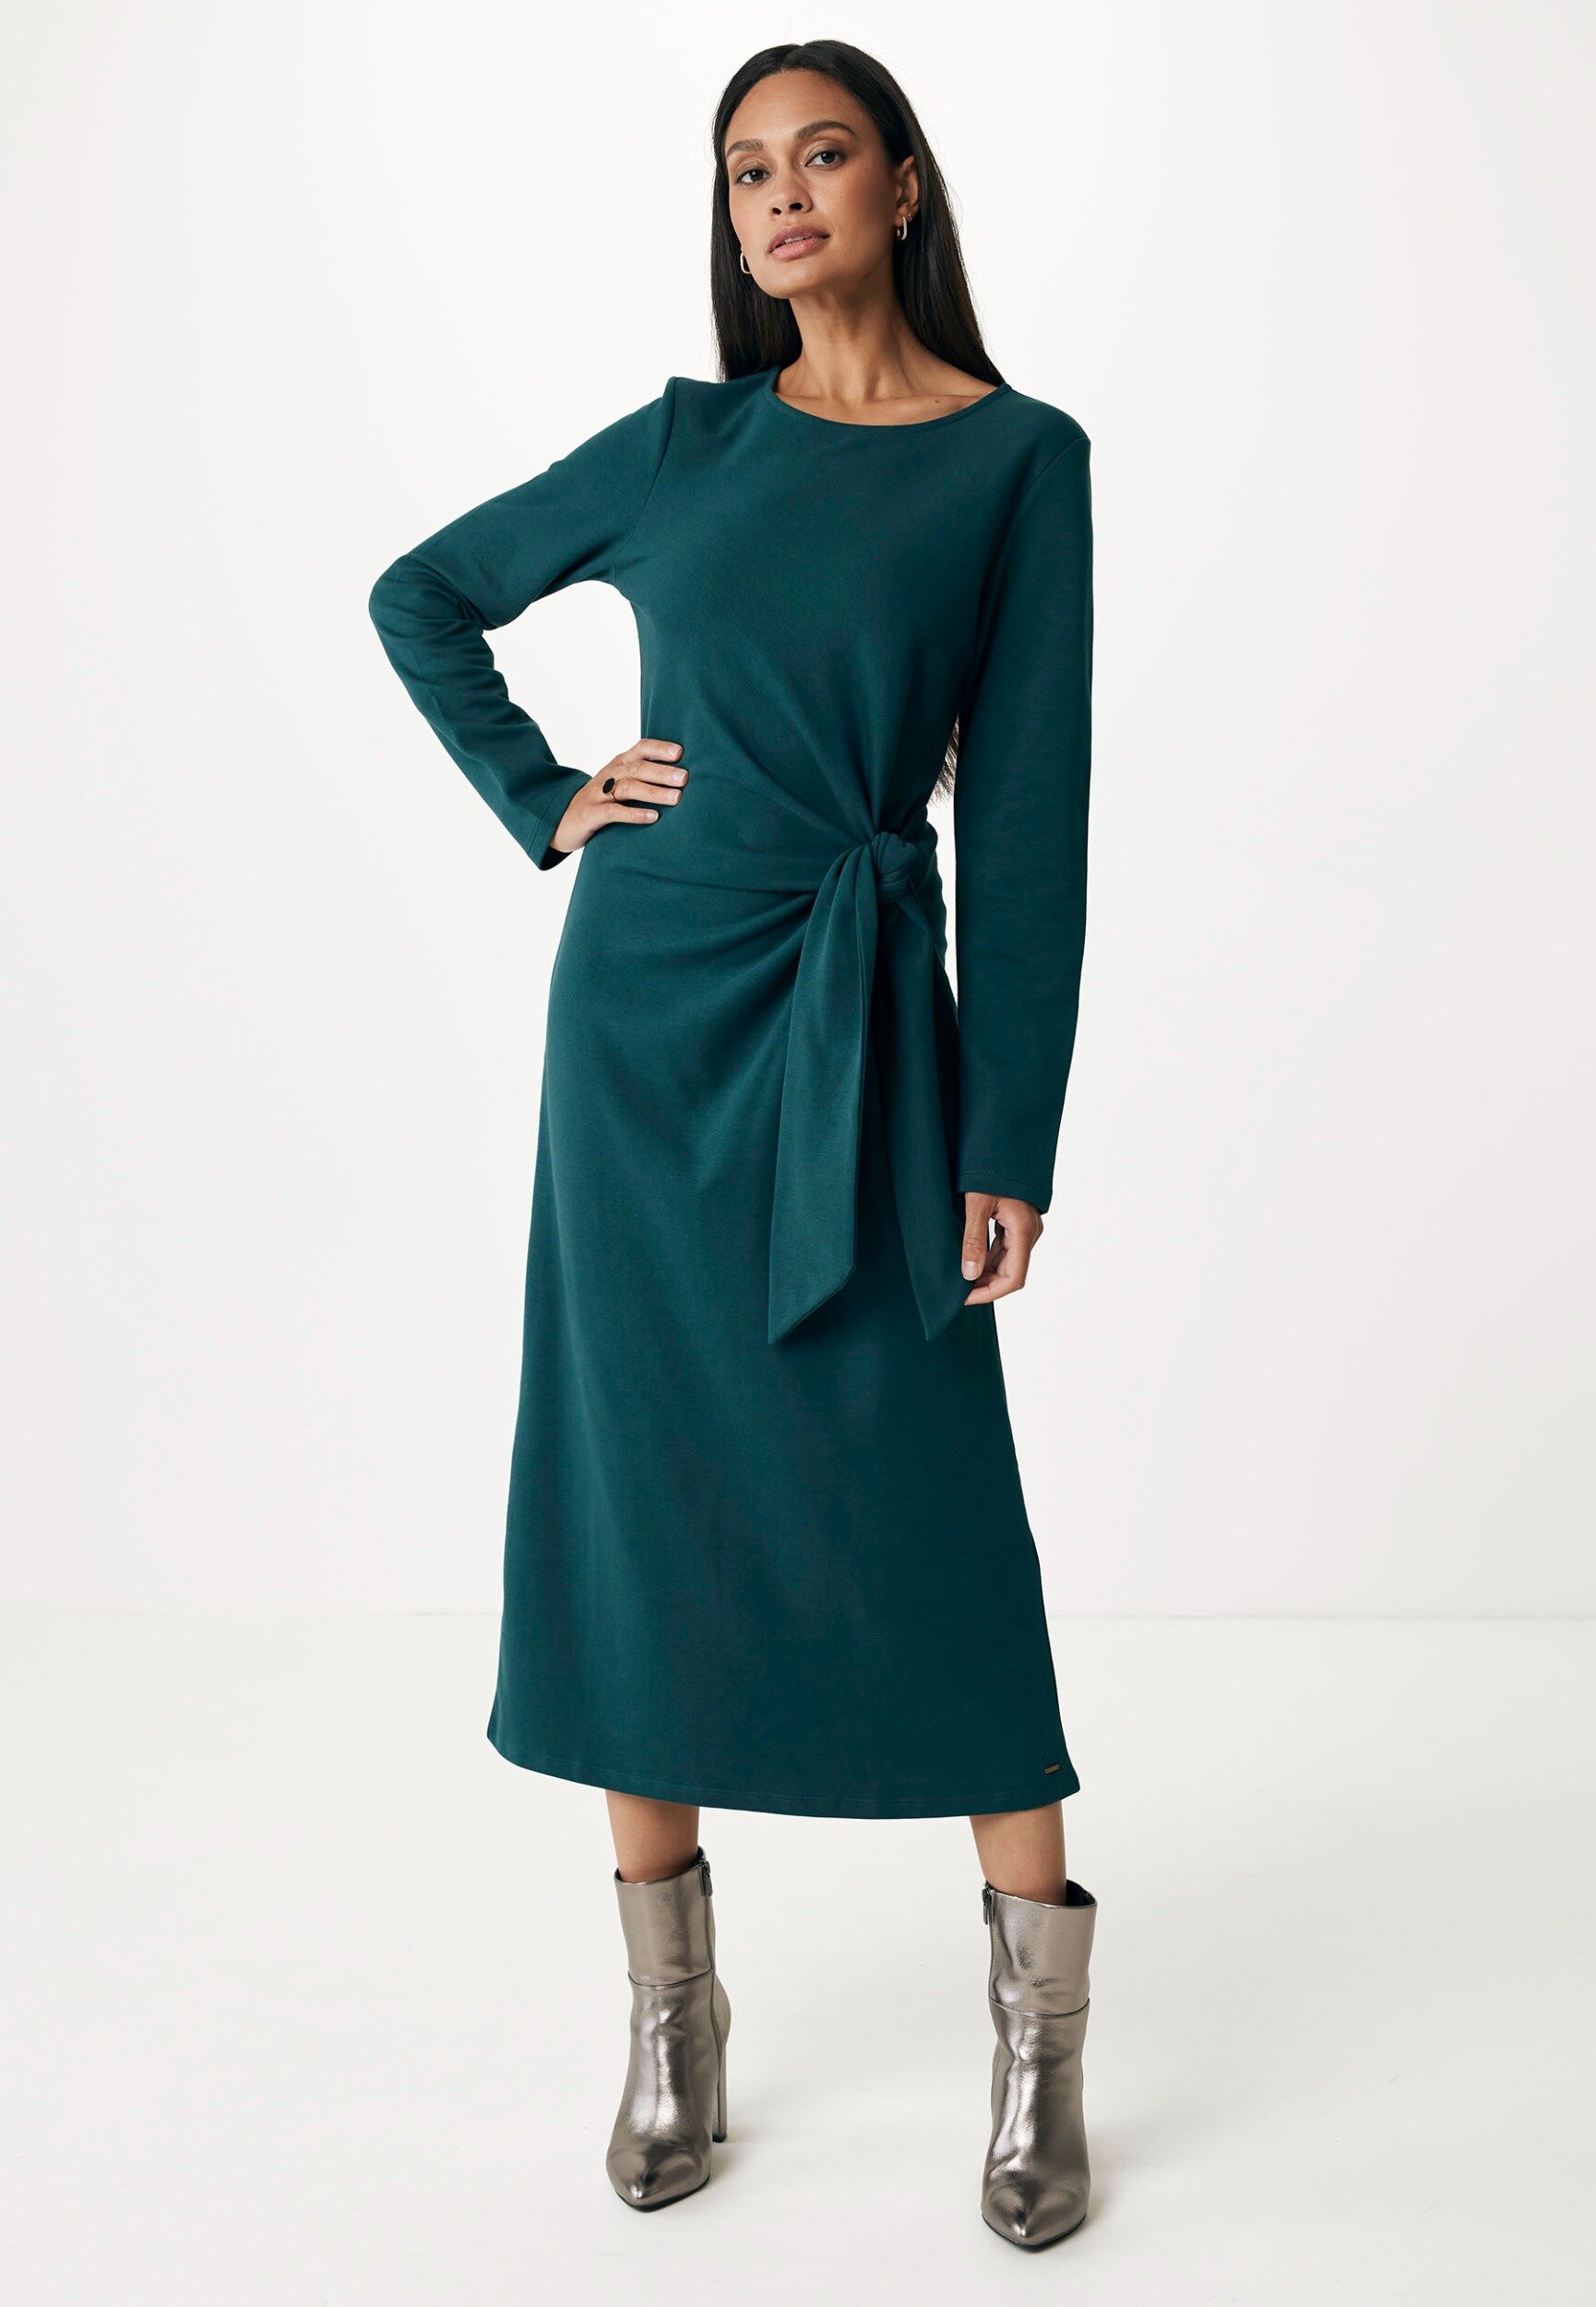 Mexx Lange Mouwen Jurk With Knotted Detail At Waist Dames - Donker Groen - Maat XS